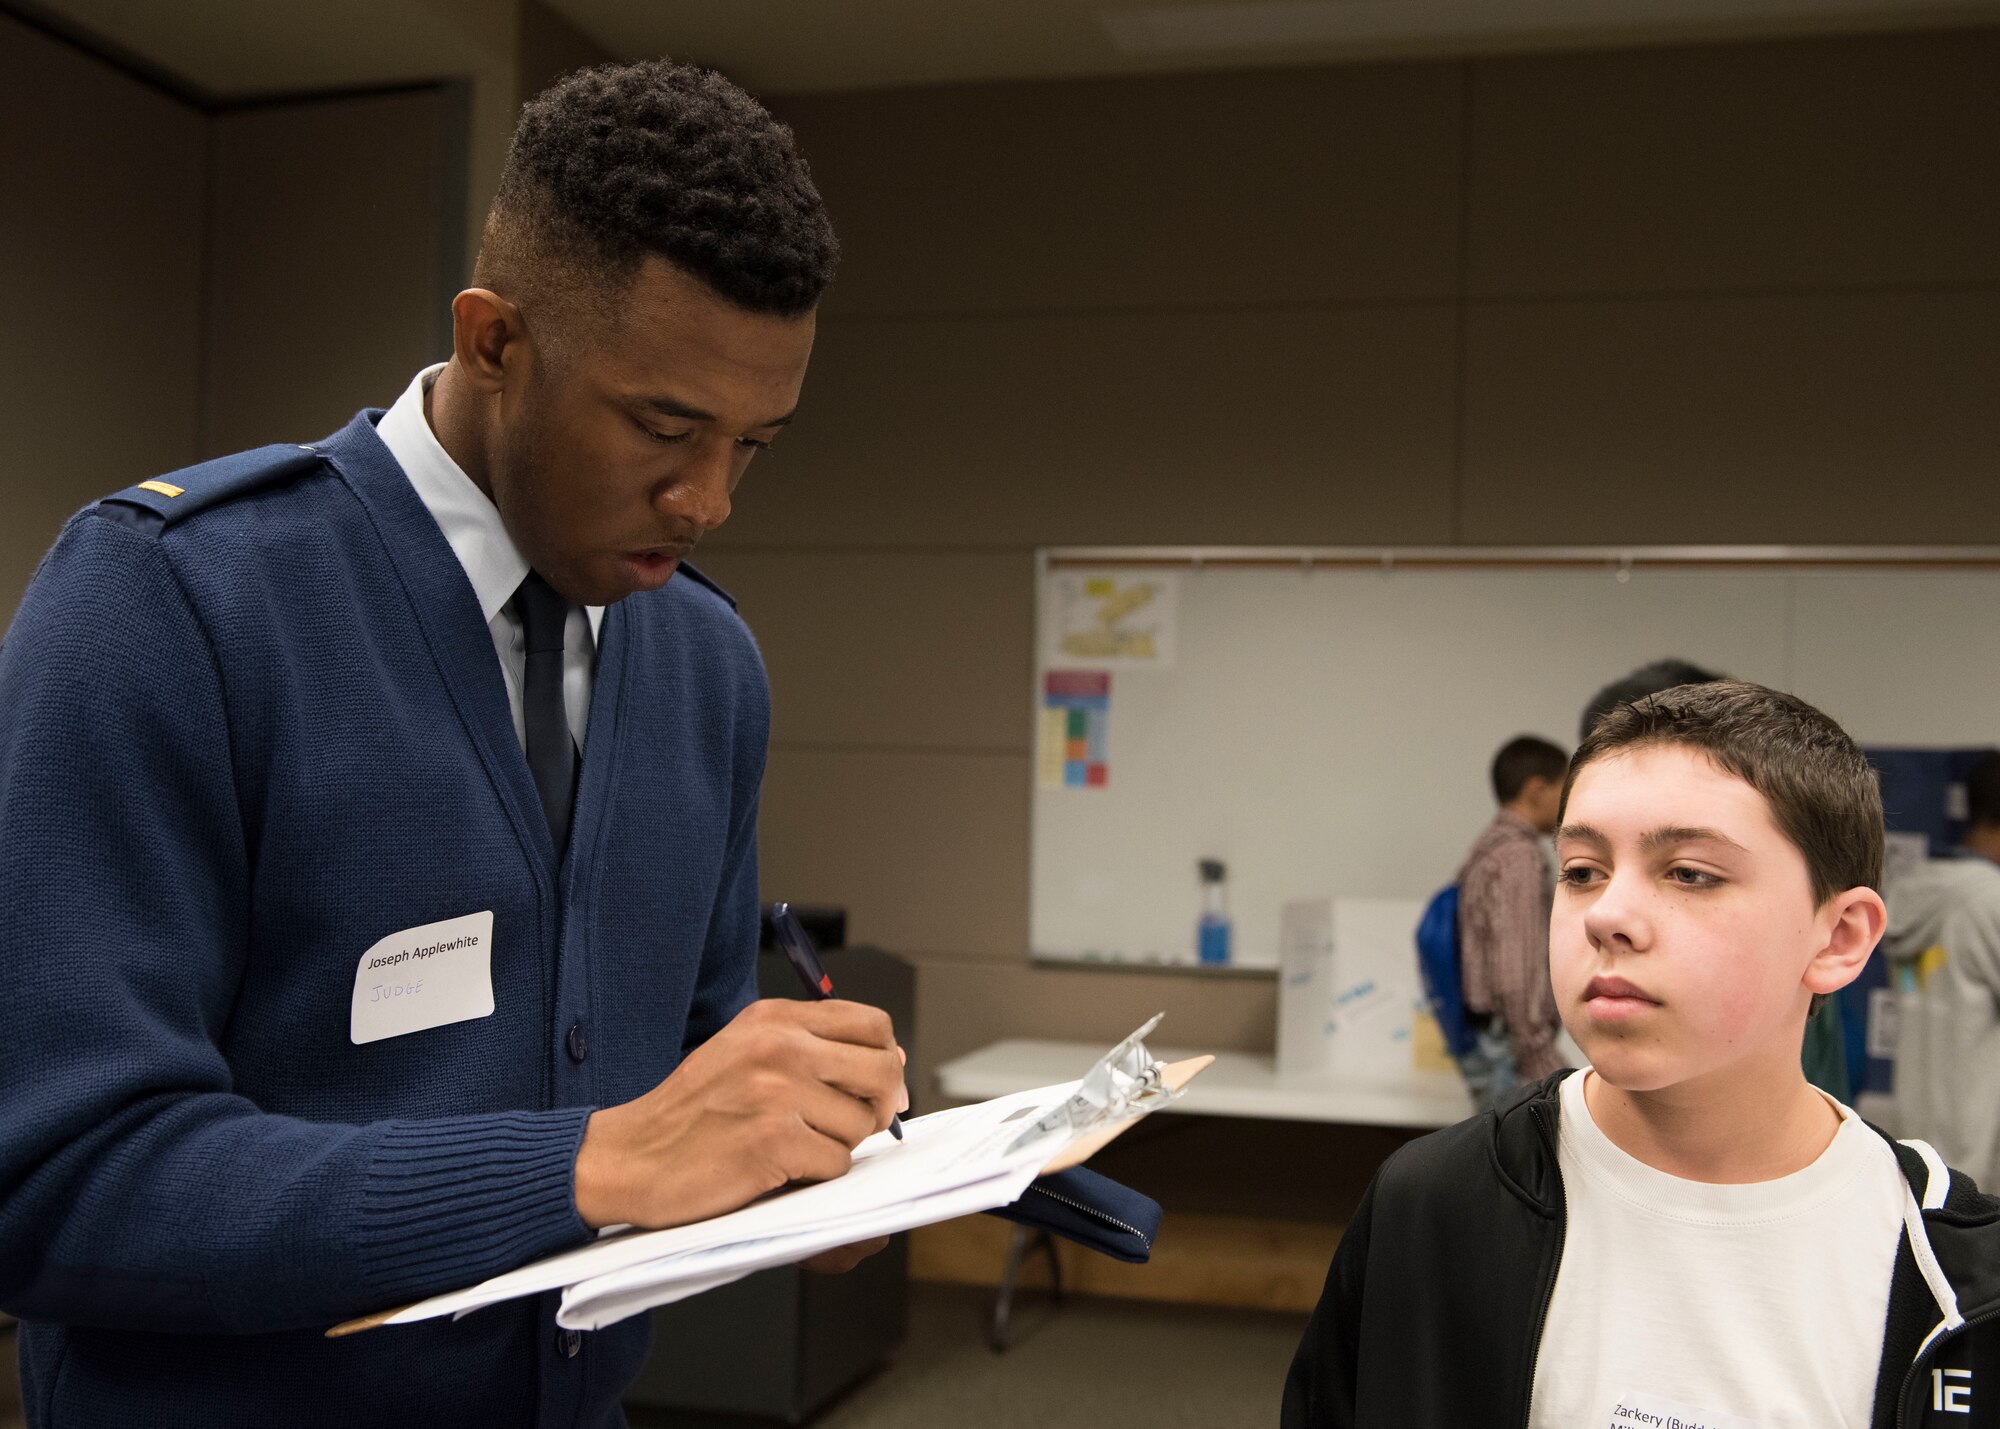 2nd Lt. Joseph Applewhite, 92nd Force Support Squadron officer promotion manager, scores the project of Zachery Miller, Deer Park Middle School student, during the Eastern Washington Regional Science and Engineering Fair at the Spokane Washington State University campus, Washington, March 15, 2018. Team Fairchild officers and Airmen were invited by WSU to help with the preliminary judging of the students projects. (U.S. Air Force photo/Senior Airman Ryan Lackey)